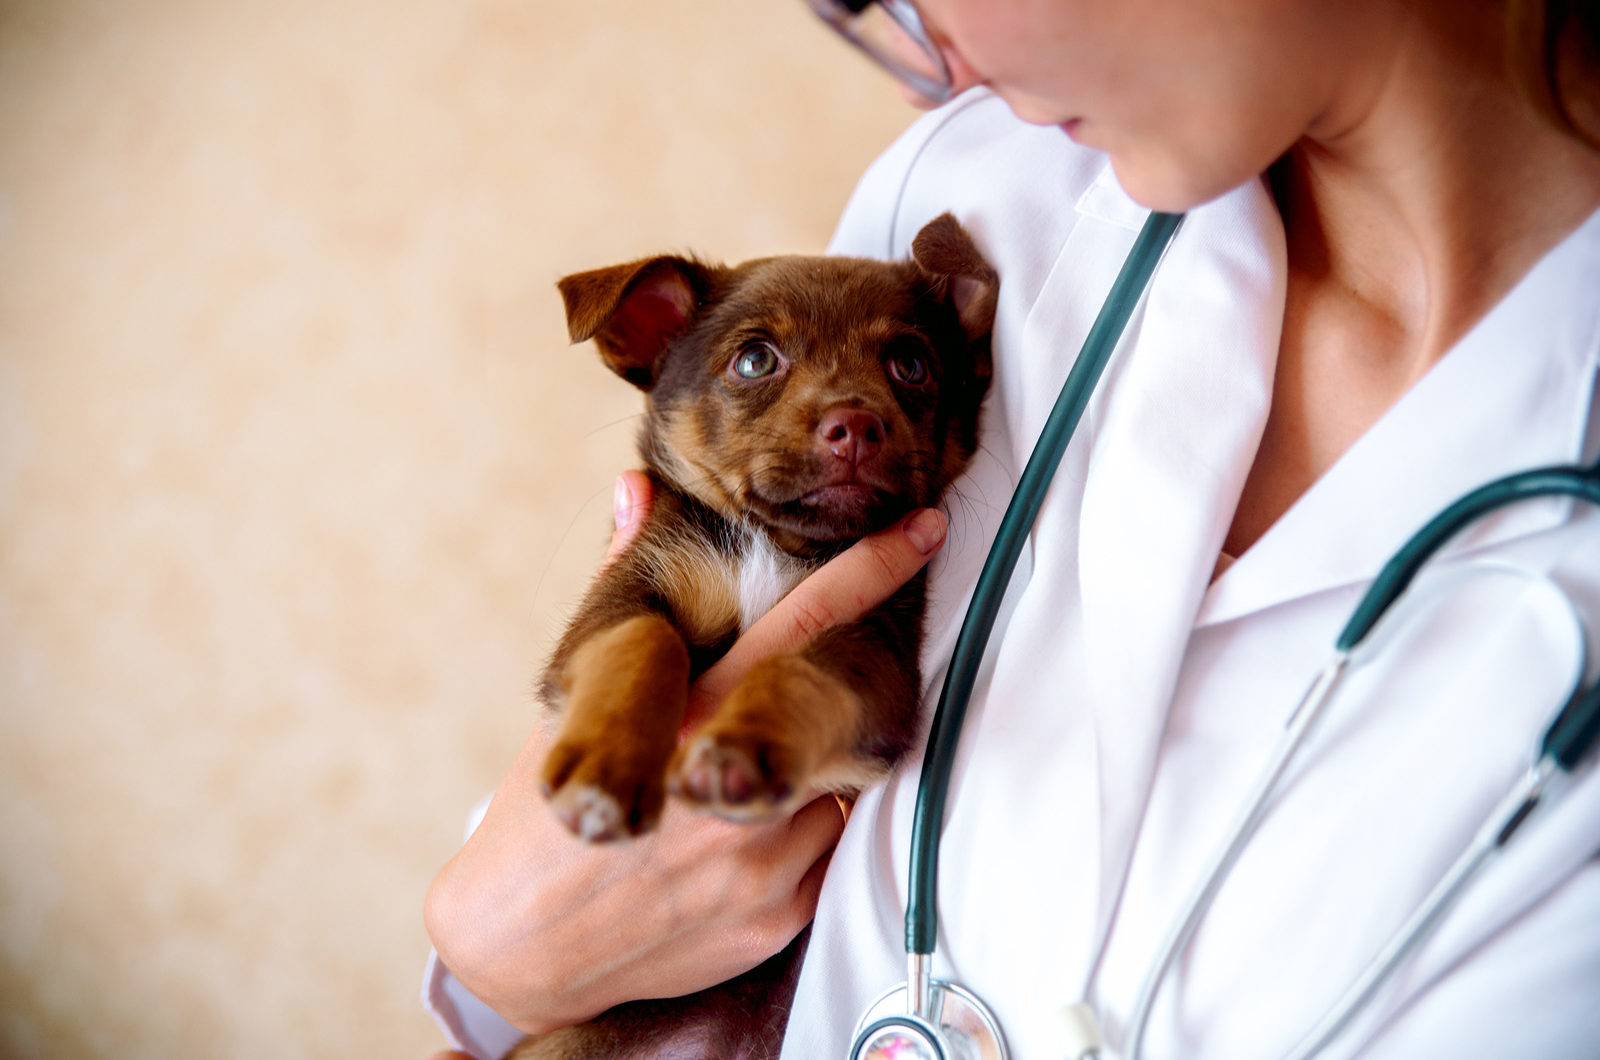 Veterinarian holding puppy: Cephalexin dosage for dogs